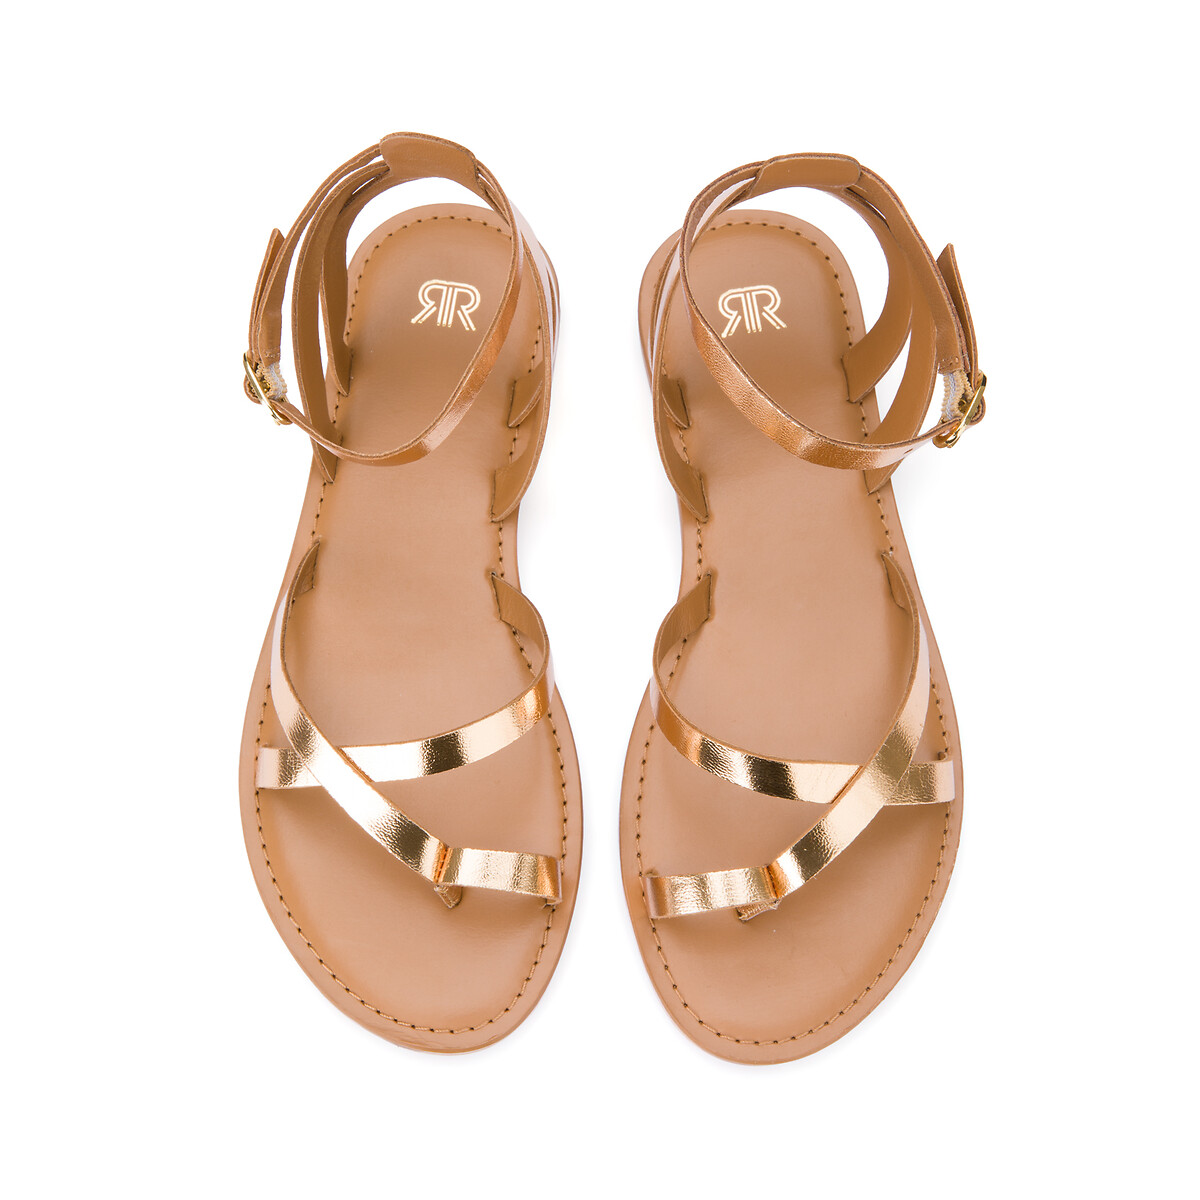 Leather flat heel sandals, gold-coloured, La Redoute Collections | La ...